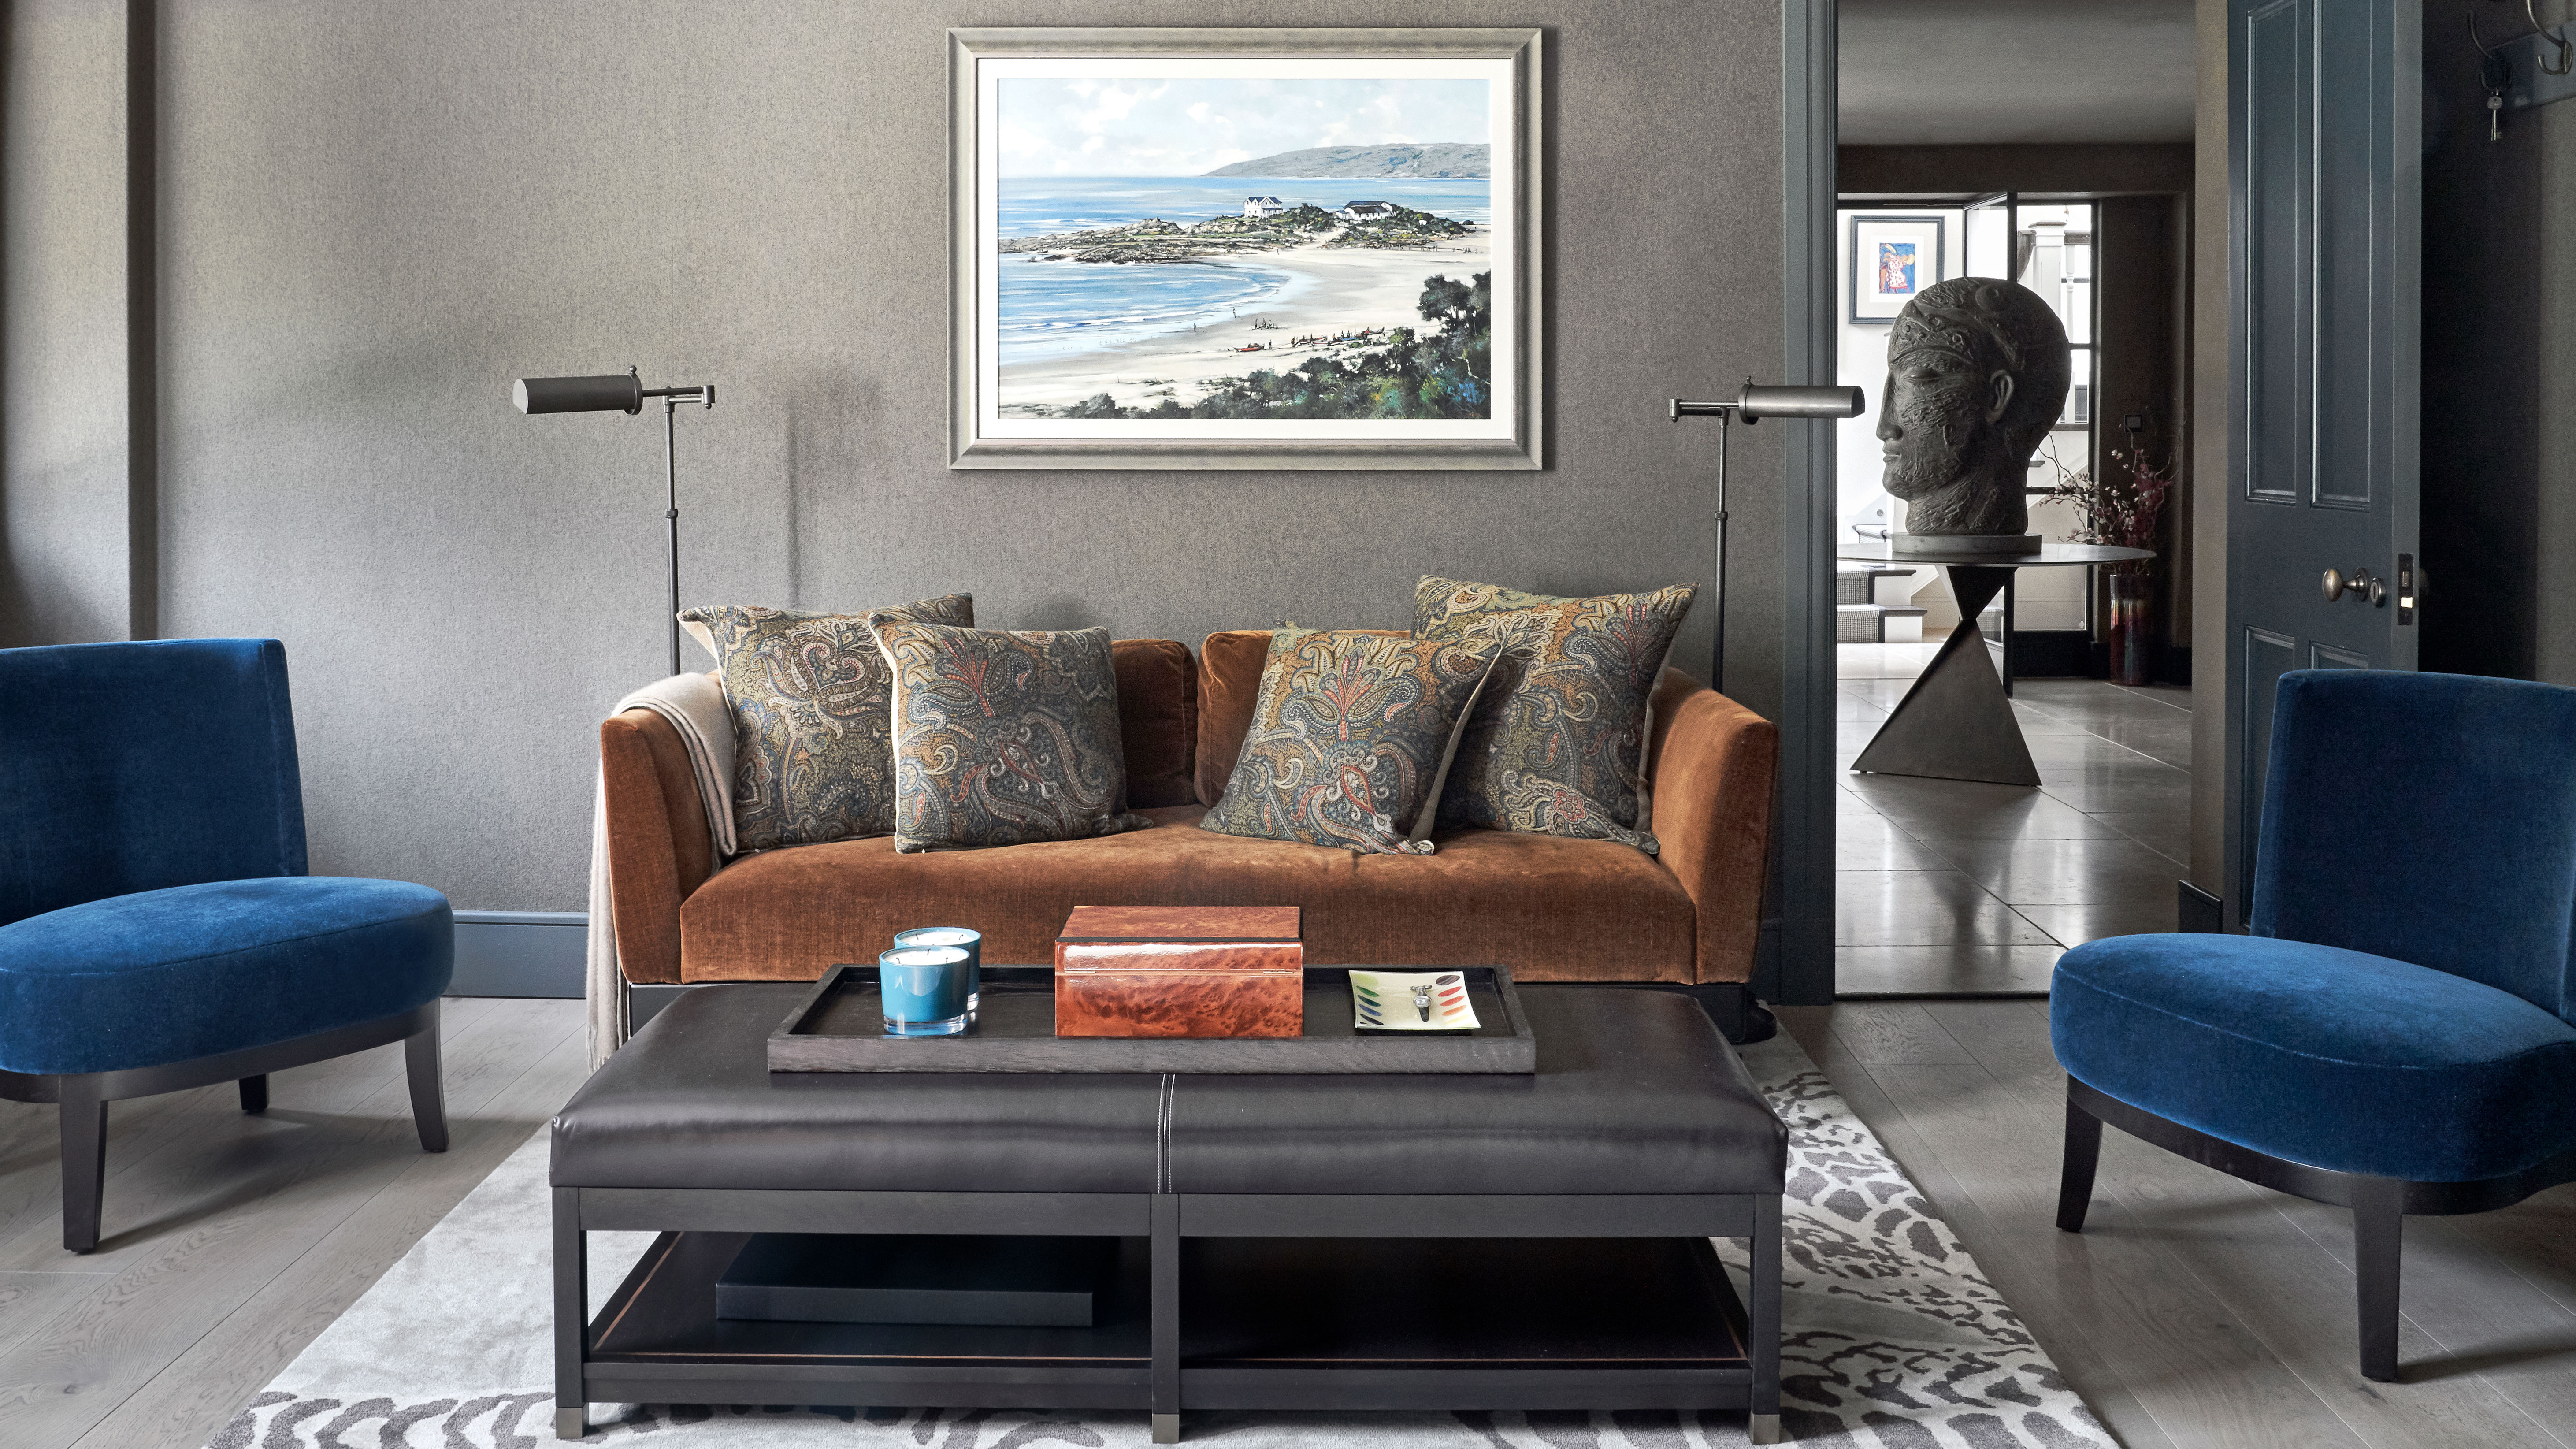 What Colors Go with a Brown Leather Sofa, According to Designers